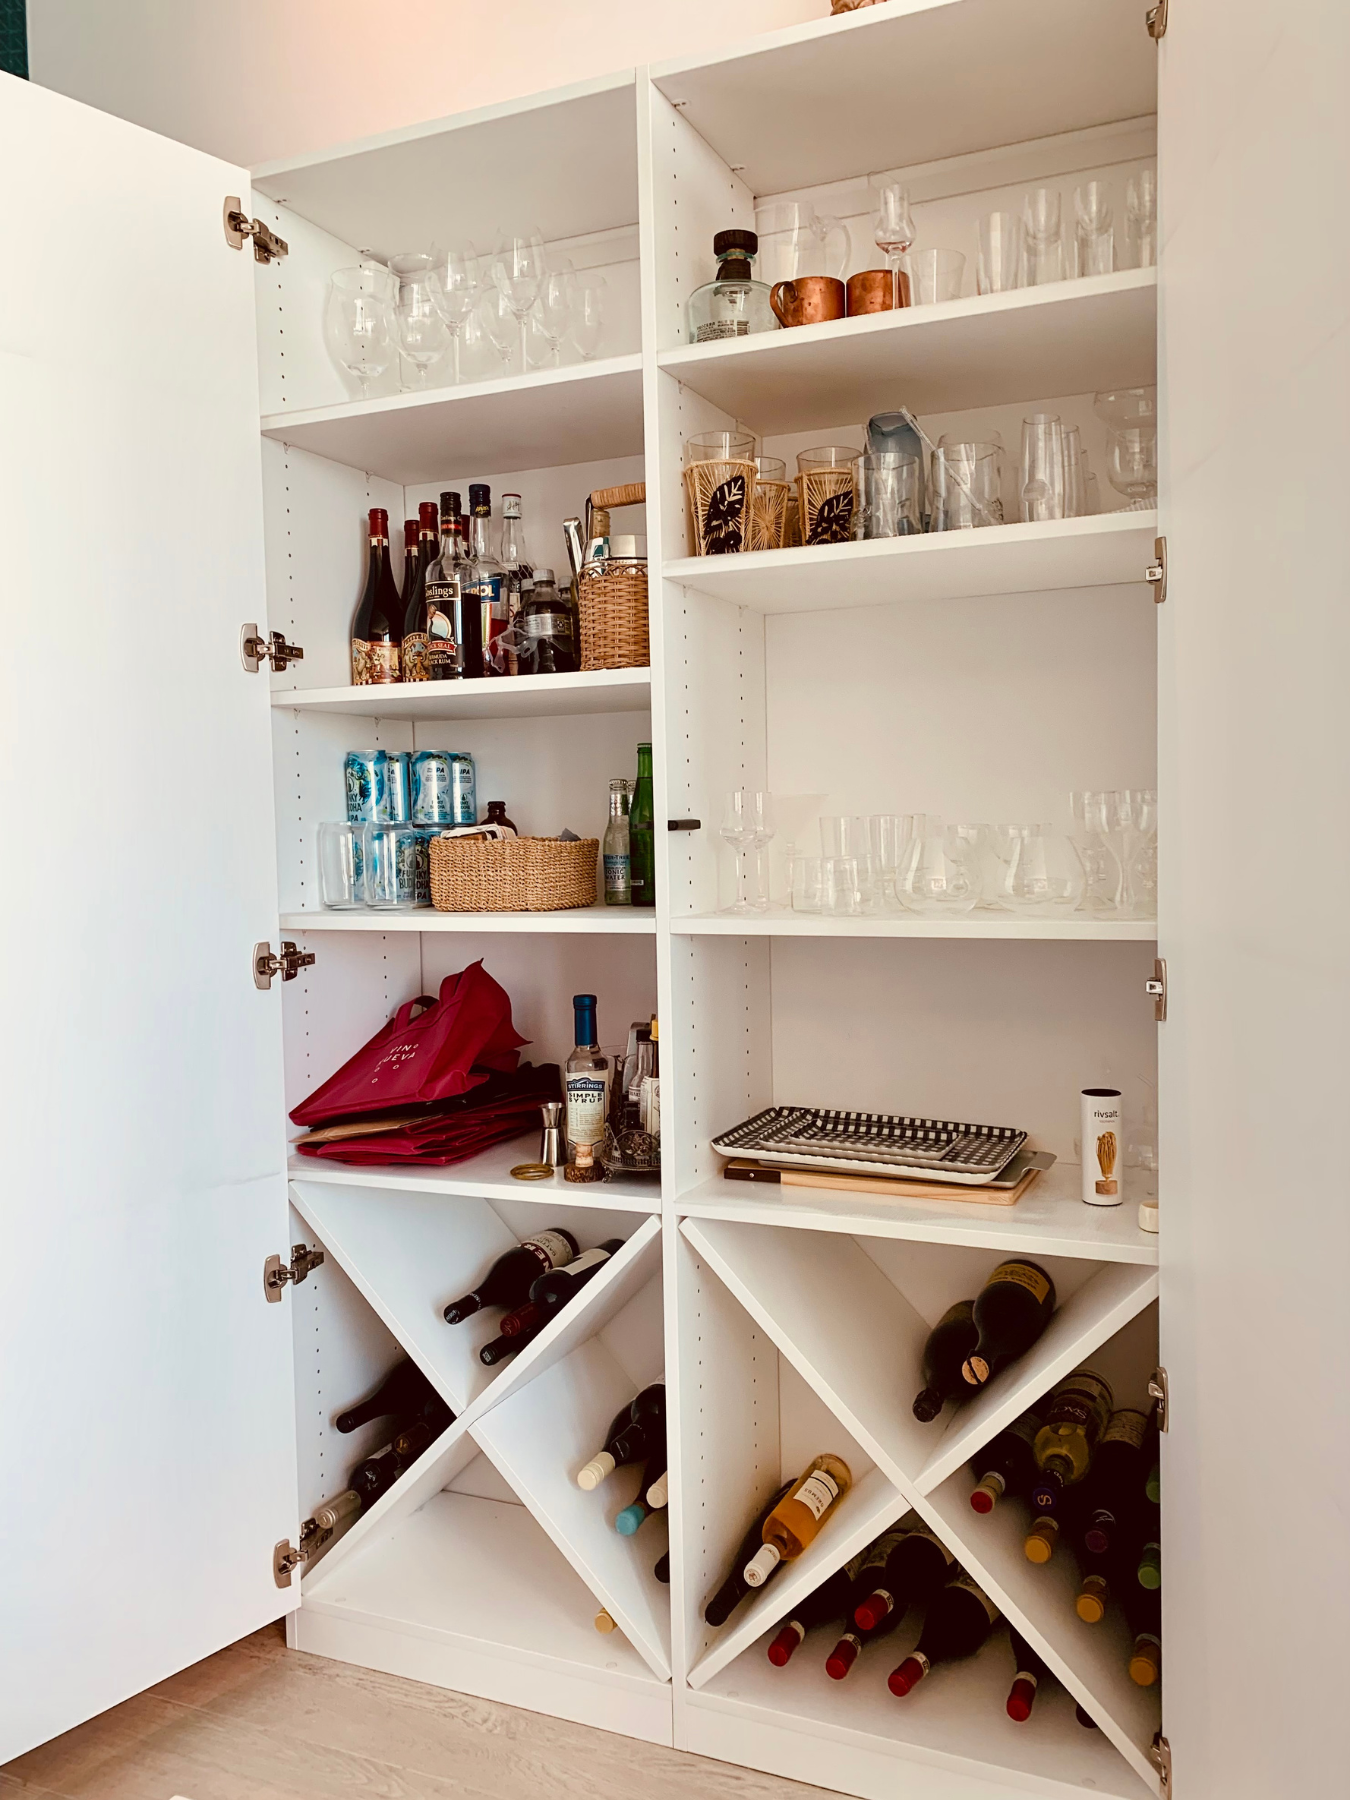 Not everyone has a room designated for a Pantry. For this client we built a custom wall unit that served as additional pantry and bar storage. Simple solutions that make a huge difference.